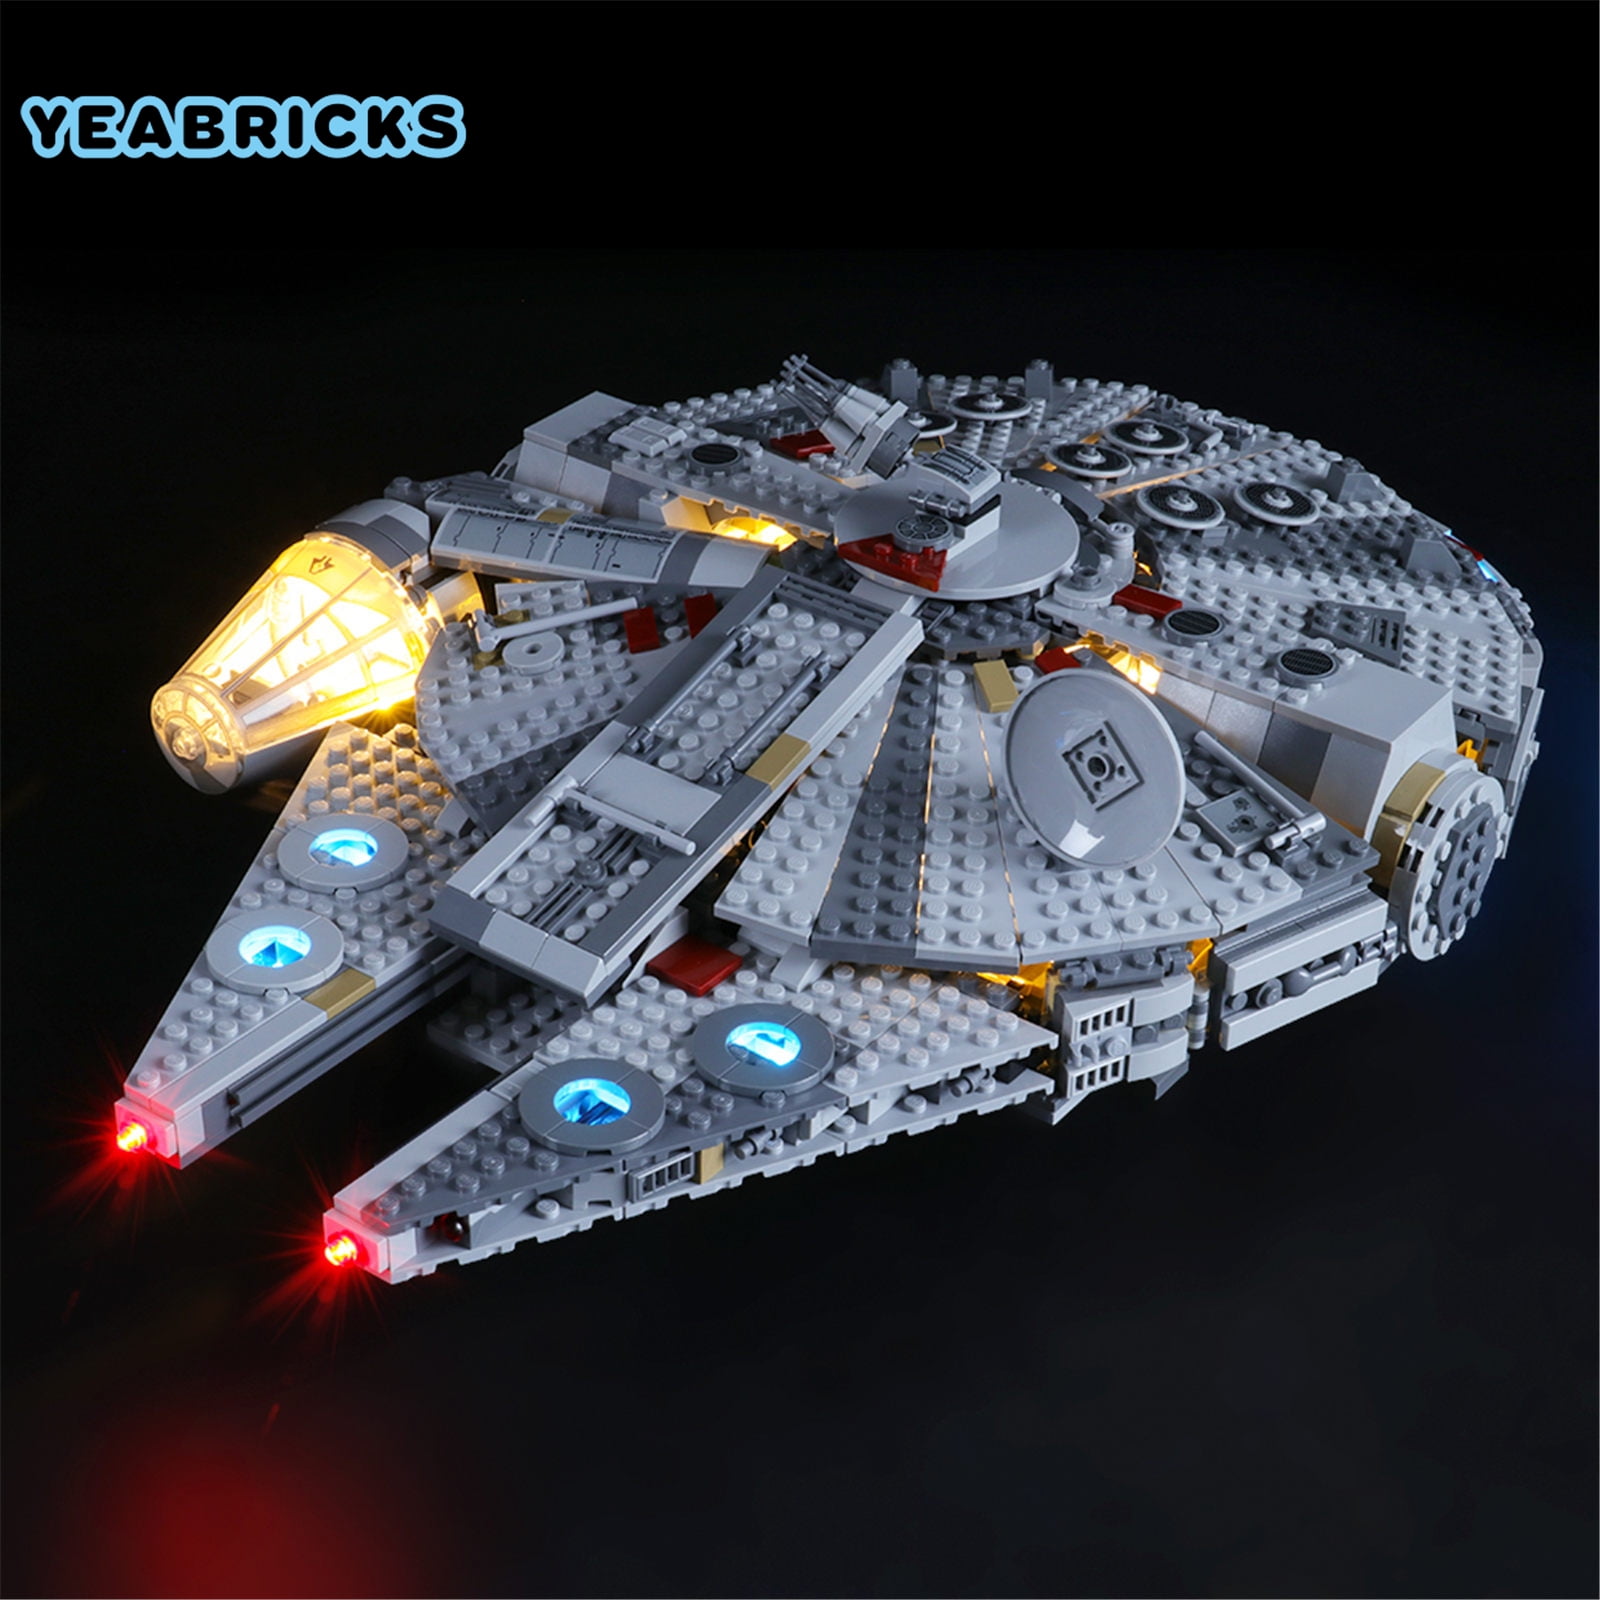 YEABRICKS LED Lighting Kit Compatible with LEGO Star Wars Millennium Falcon  75257 Building Toy Set(Not Include the Model)